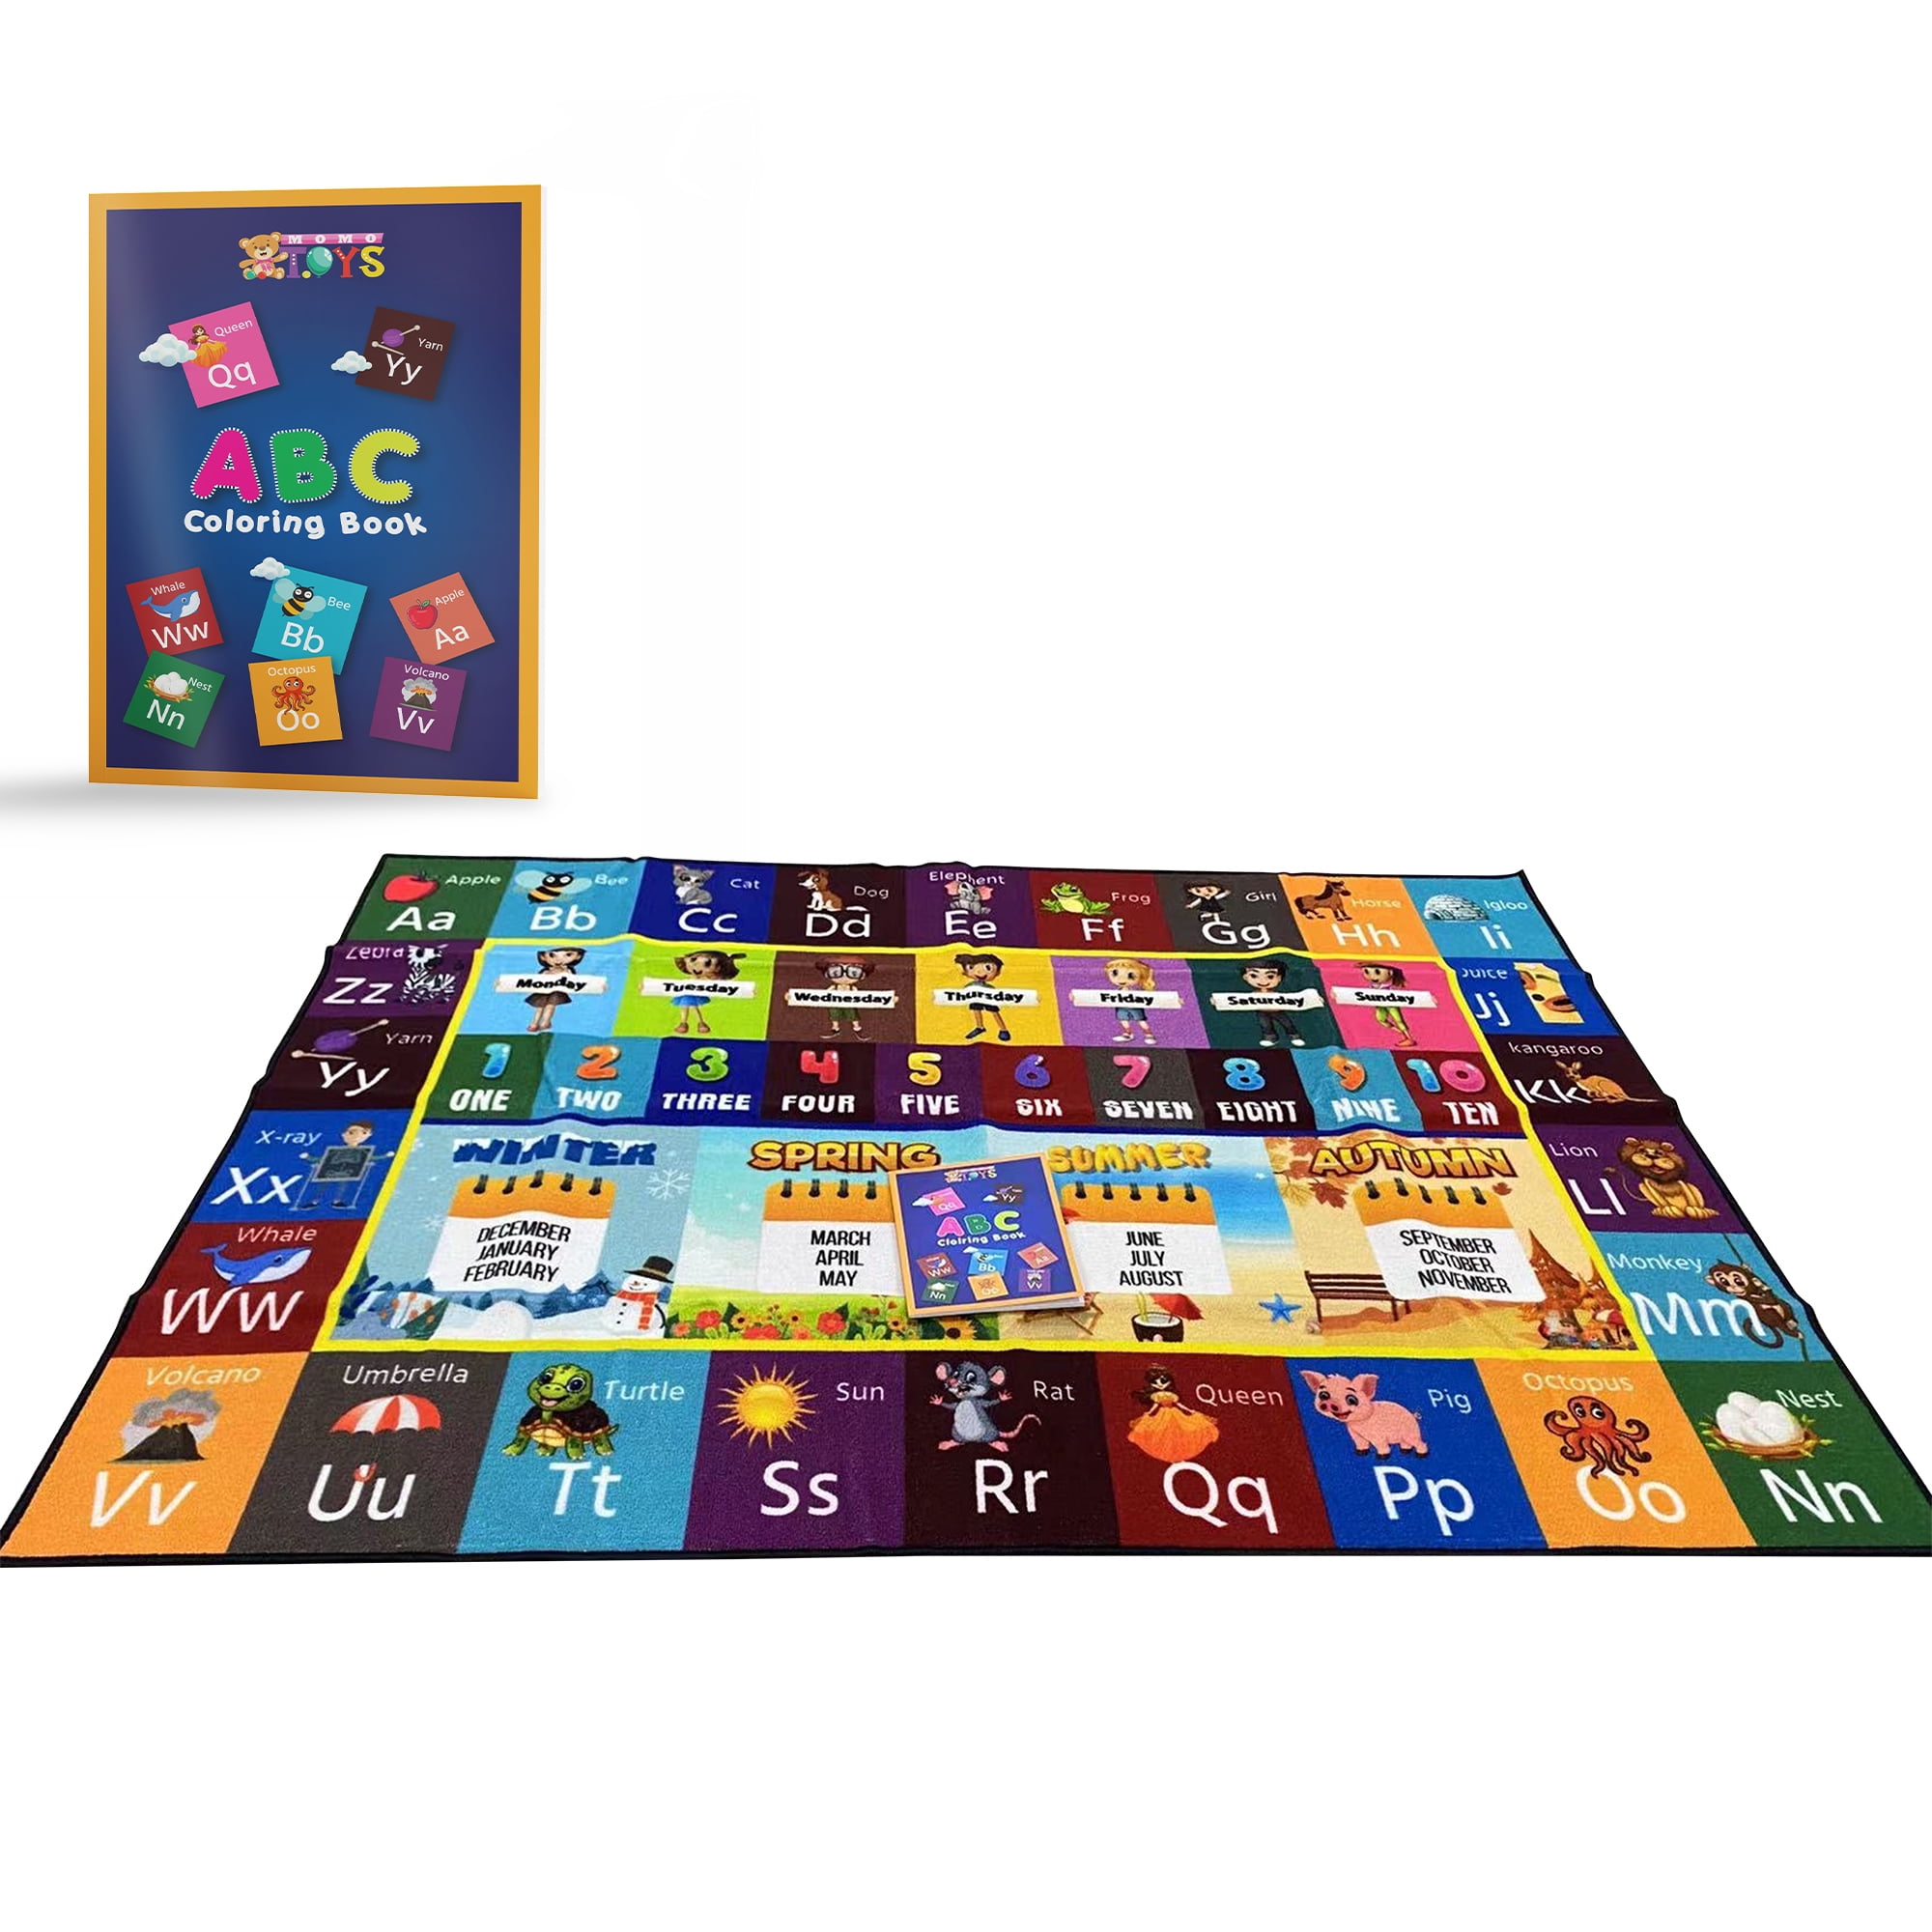 KC Cubs Playtime Collection ABC Alphabet Months and Days of The Week Educational Learning & Game Oval Area Rug Carpet for Kids and Children Bedrooms and Playroom Seasons